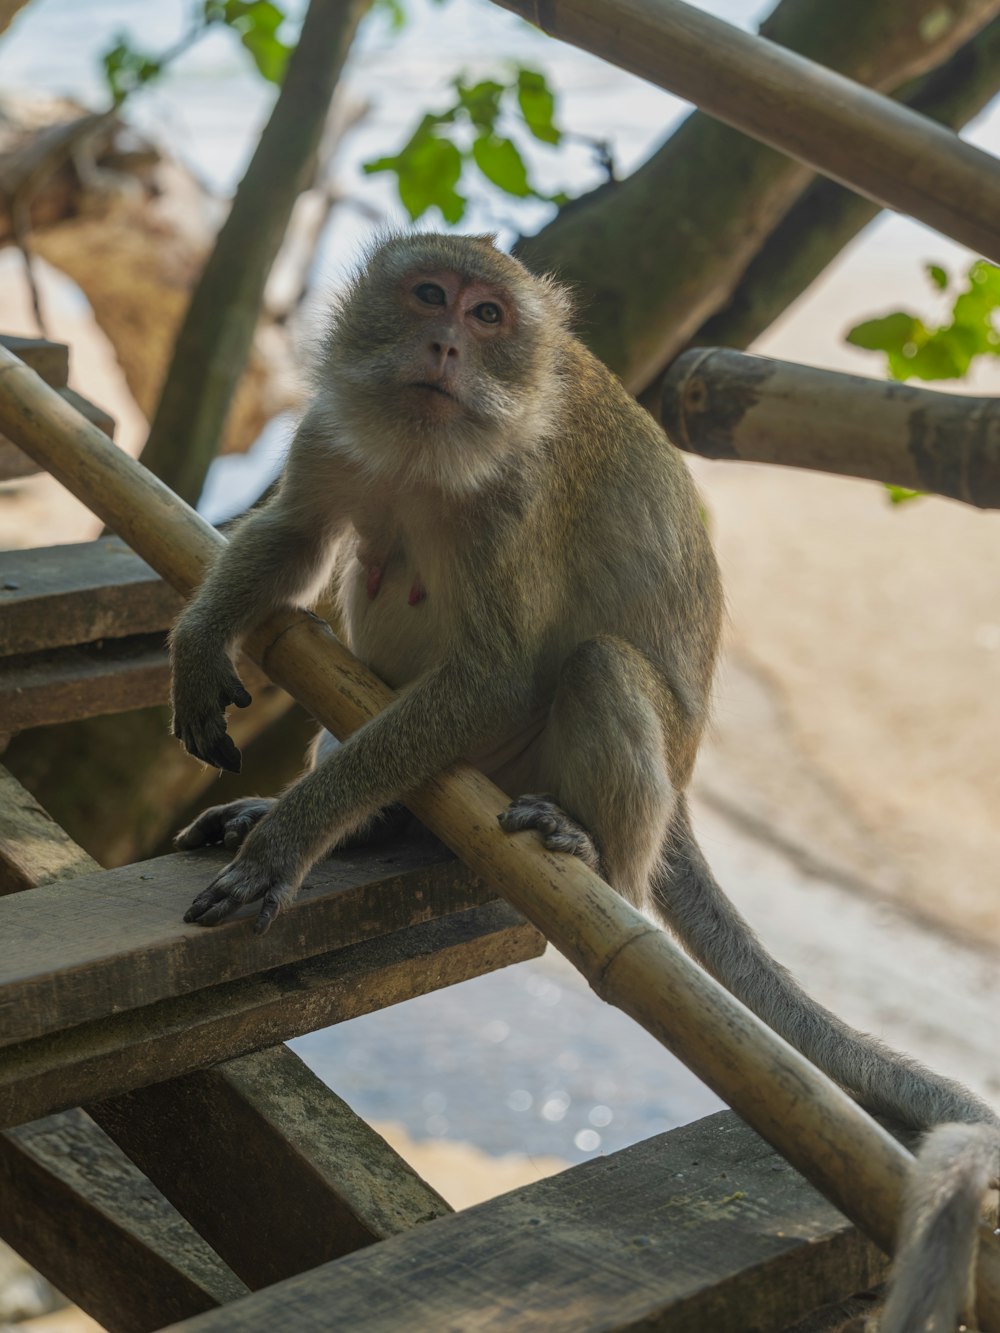 a small monkey sitting on a wooden bench